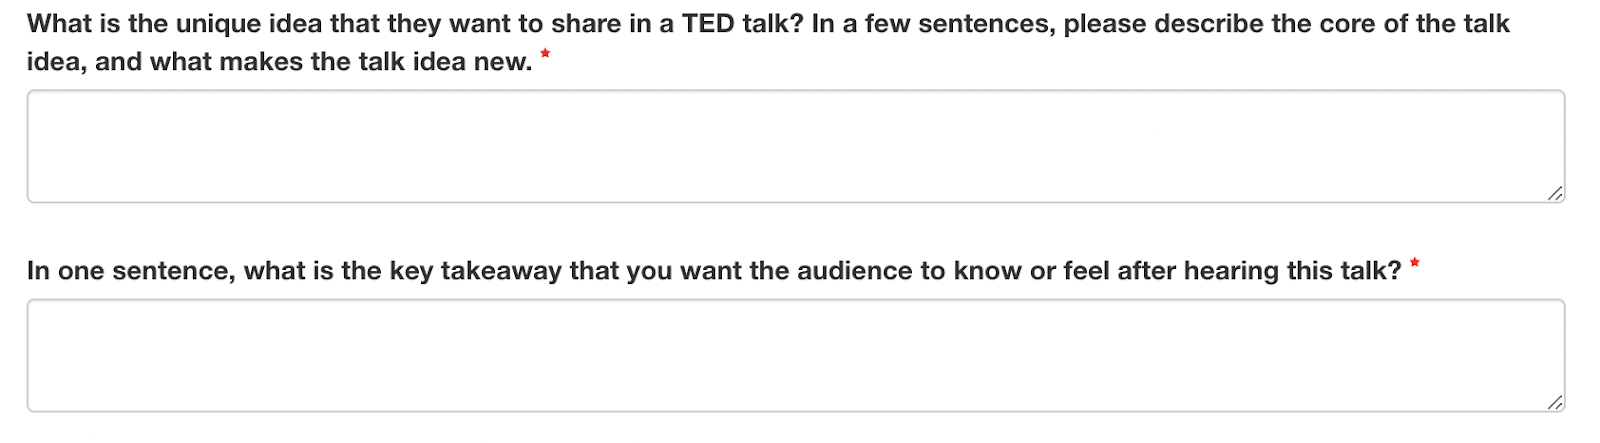 how do you get to do a ted talk